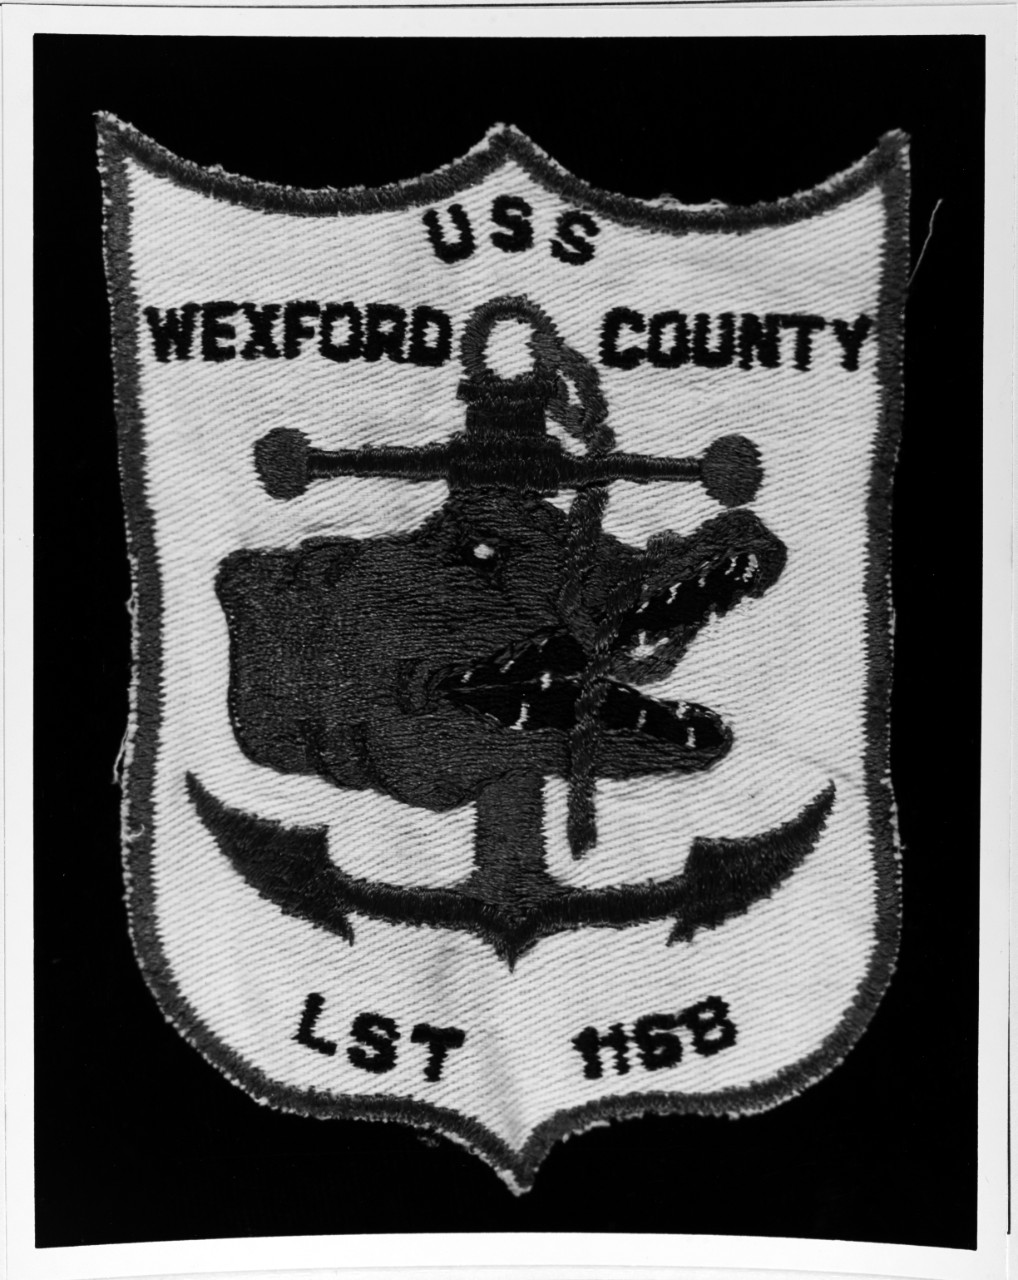 Insignia:  USS WEXFORD COUNTY (LST-1168)